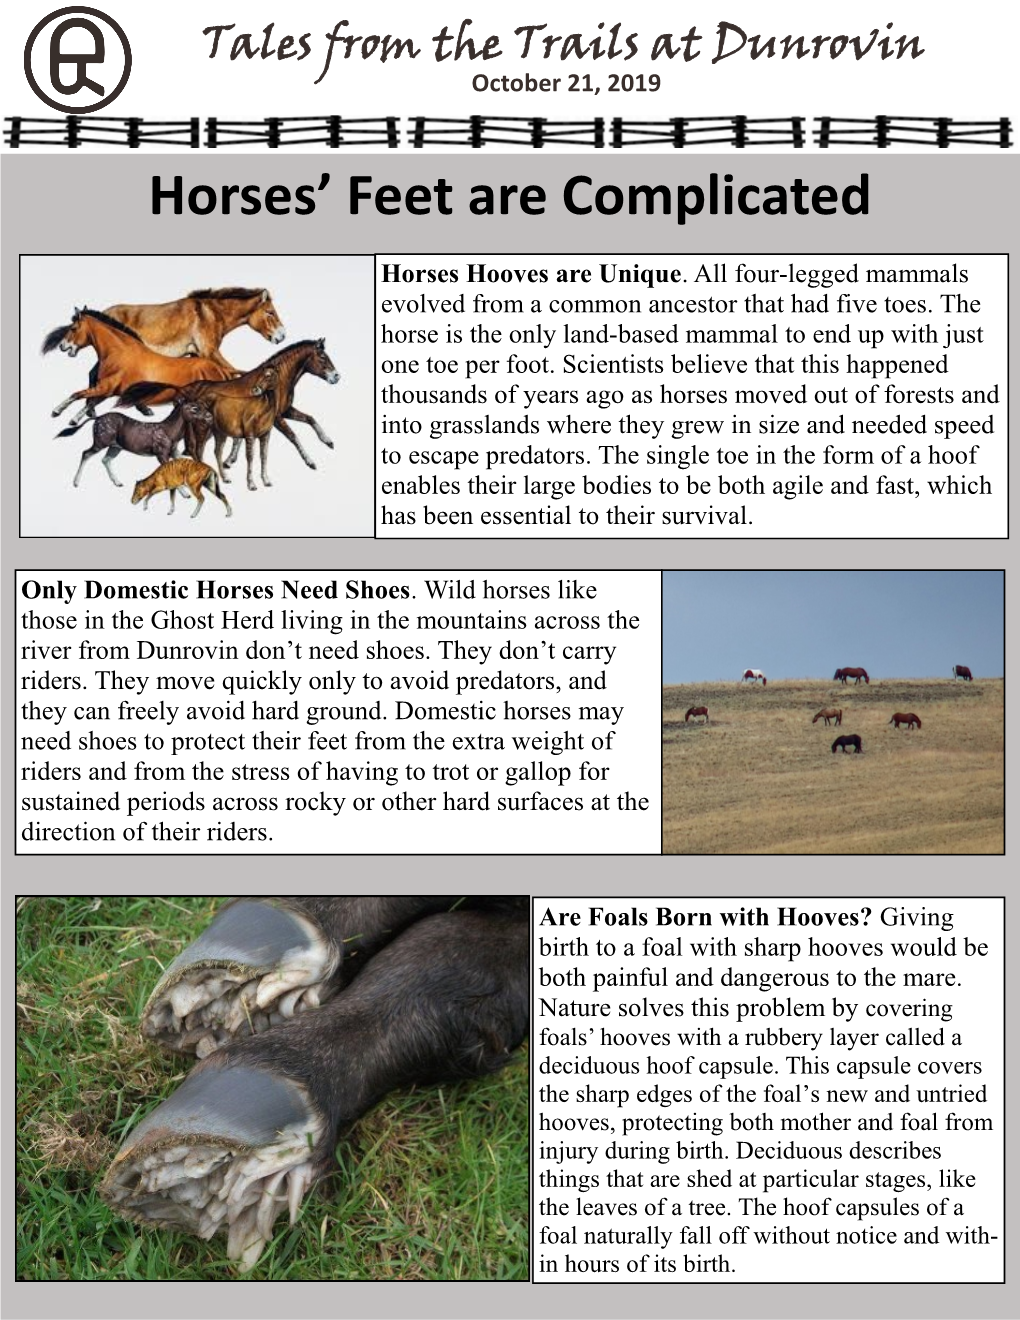 Horses' Feet Are Complicated